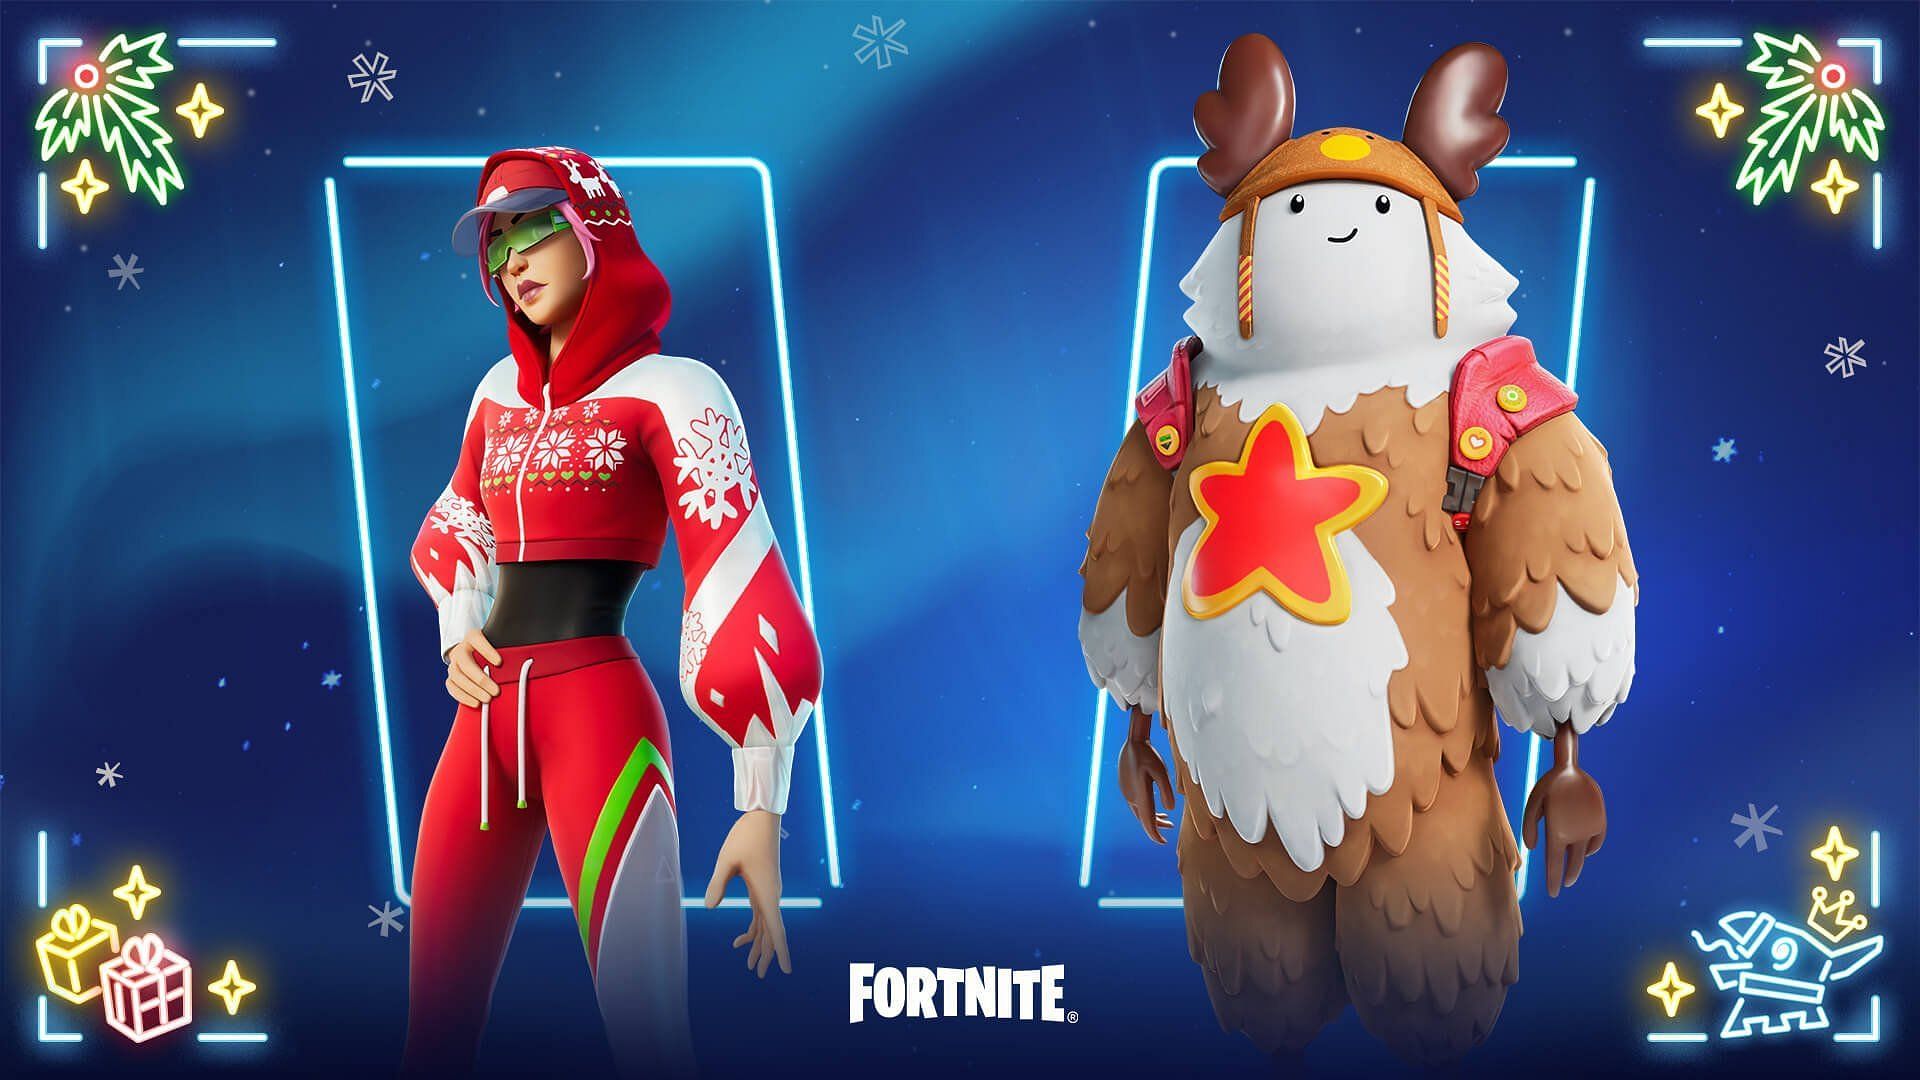 Get the Arctic Adeline and Sled Ready Guff skins during Fortnite Winterfest 2022 (Image via Twitter/JayKeyFN)